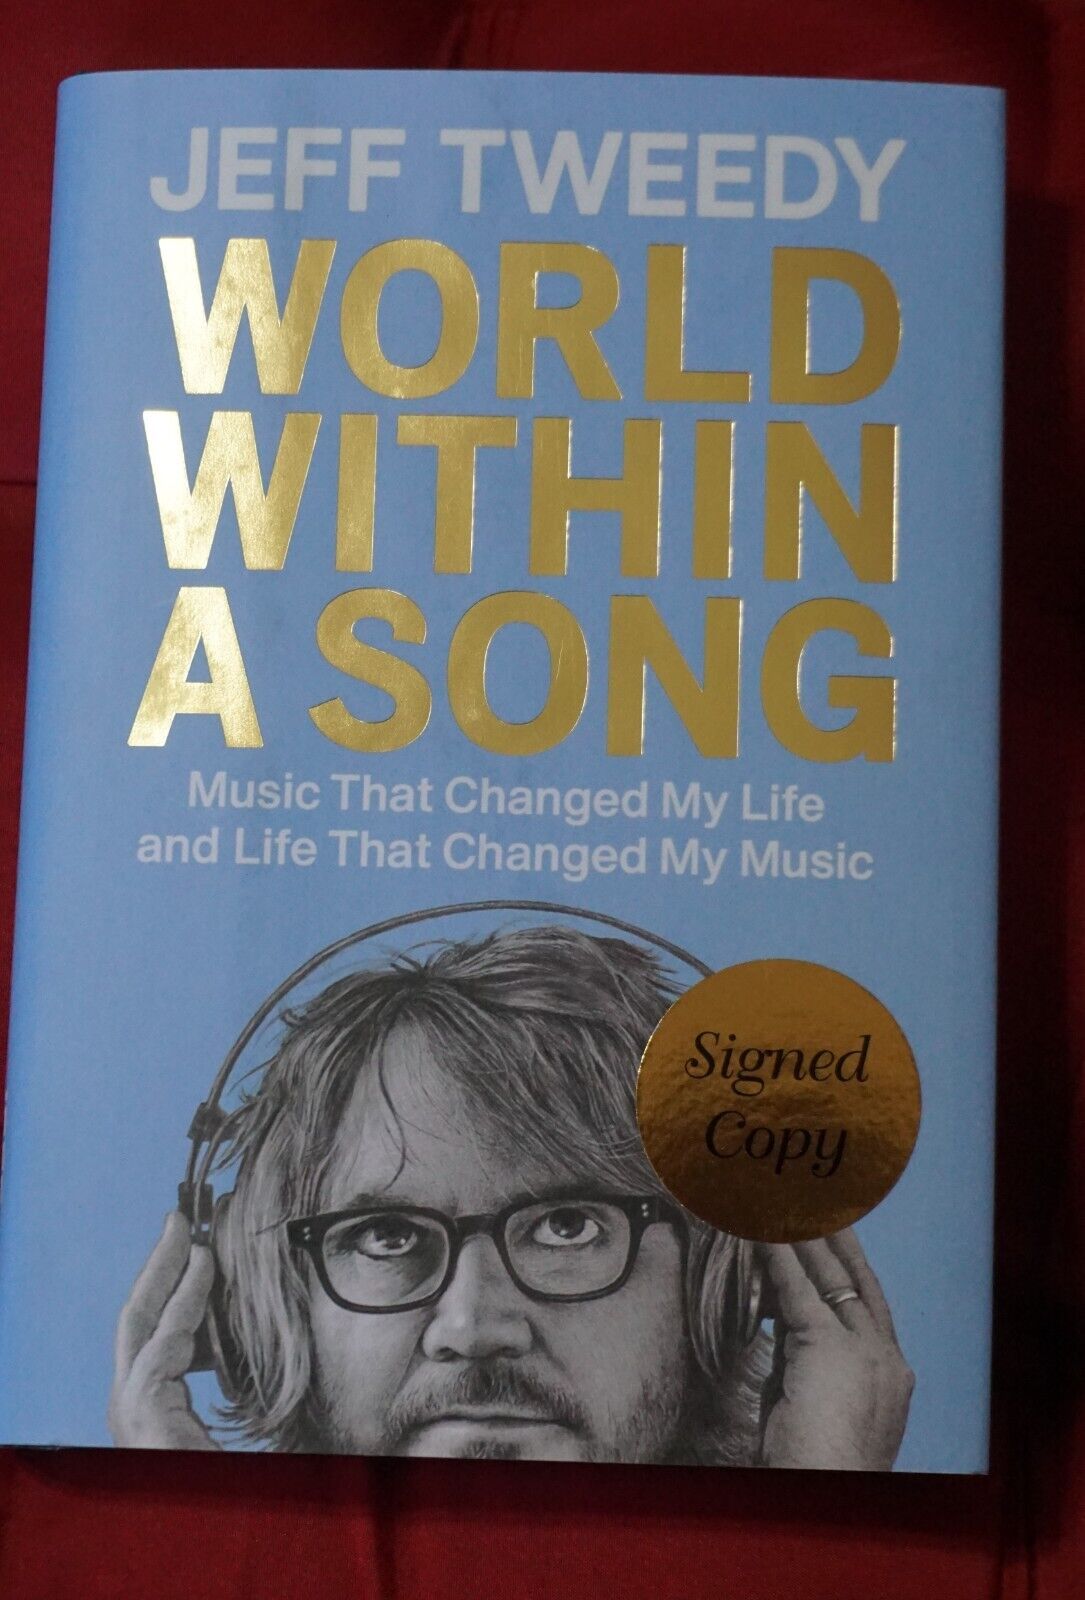 NEW SIGNED JEFF TWEEDY WORLD WITHIN A SONG 1ST PRINTING SIGNED EDITION HC WILCO Без бренда